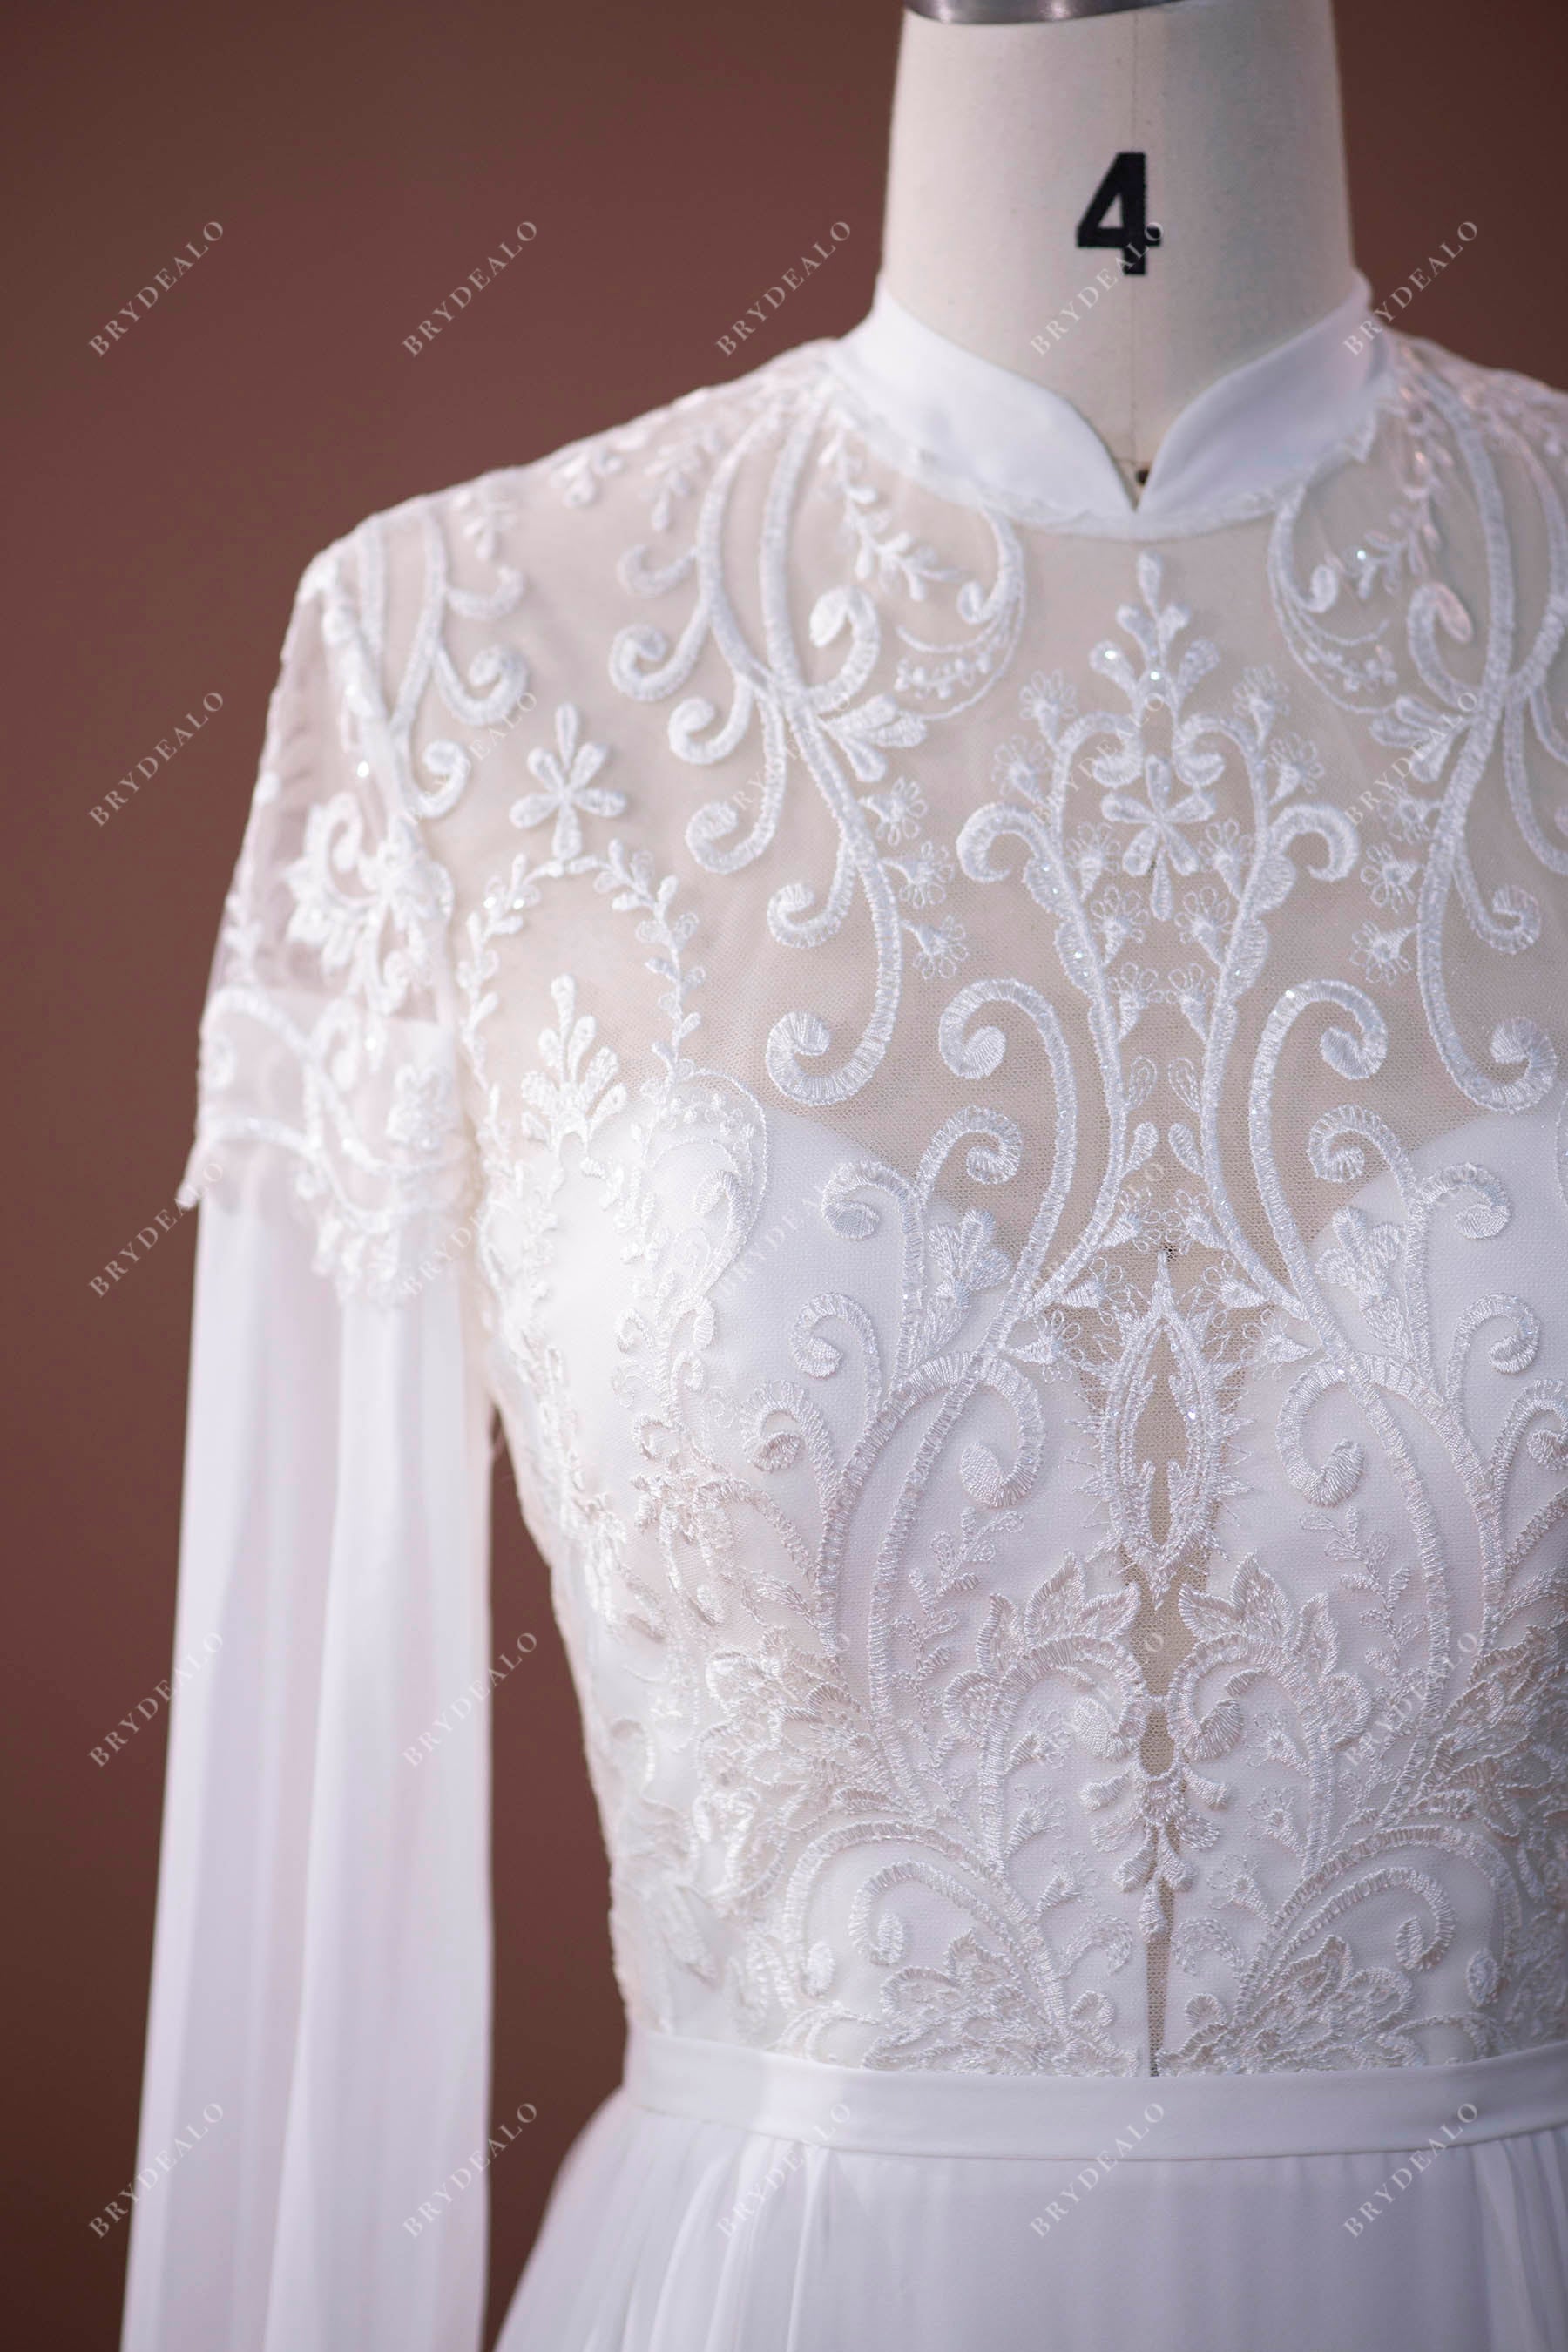 shimmery beaded lace appliqued bridal dress